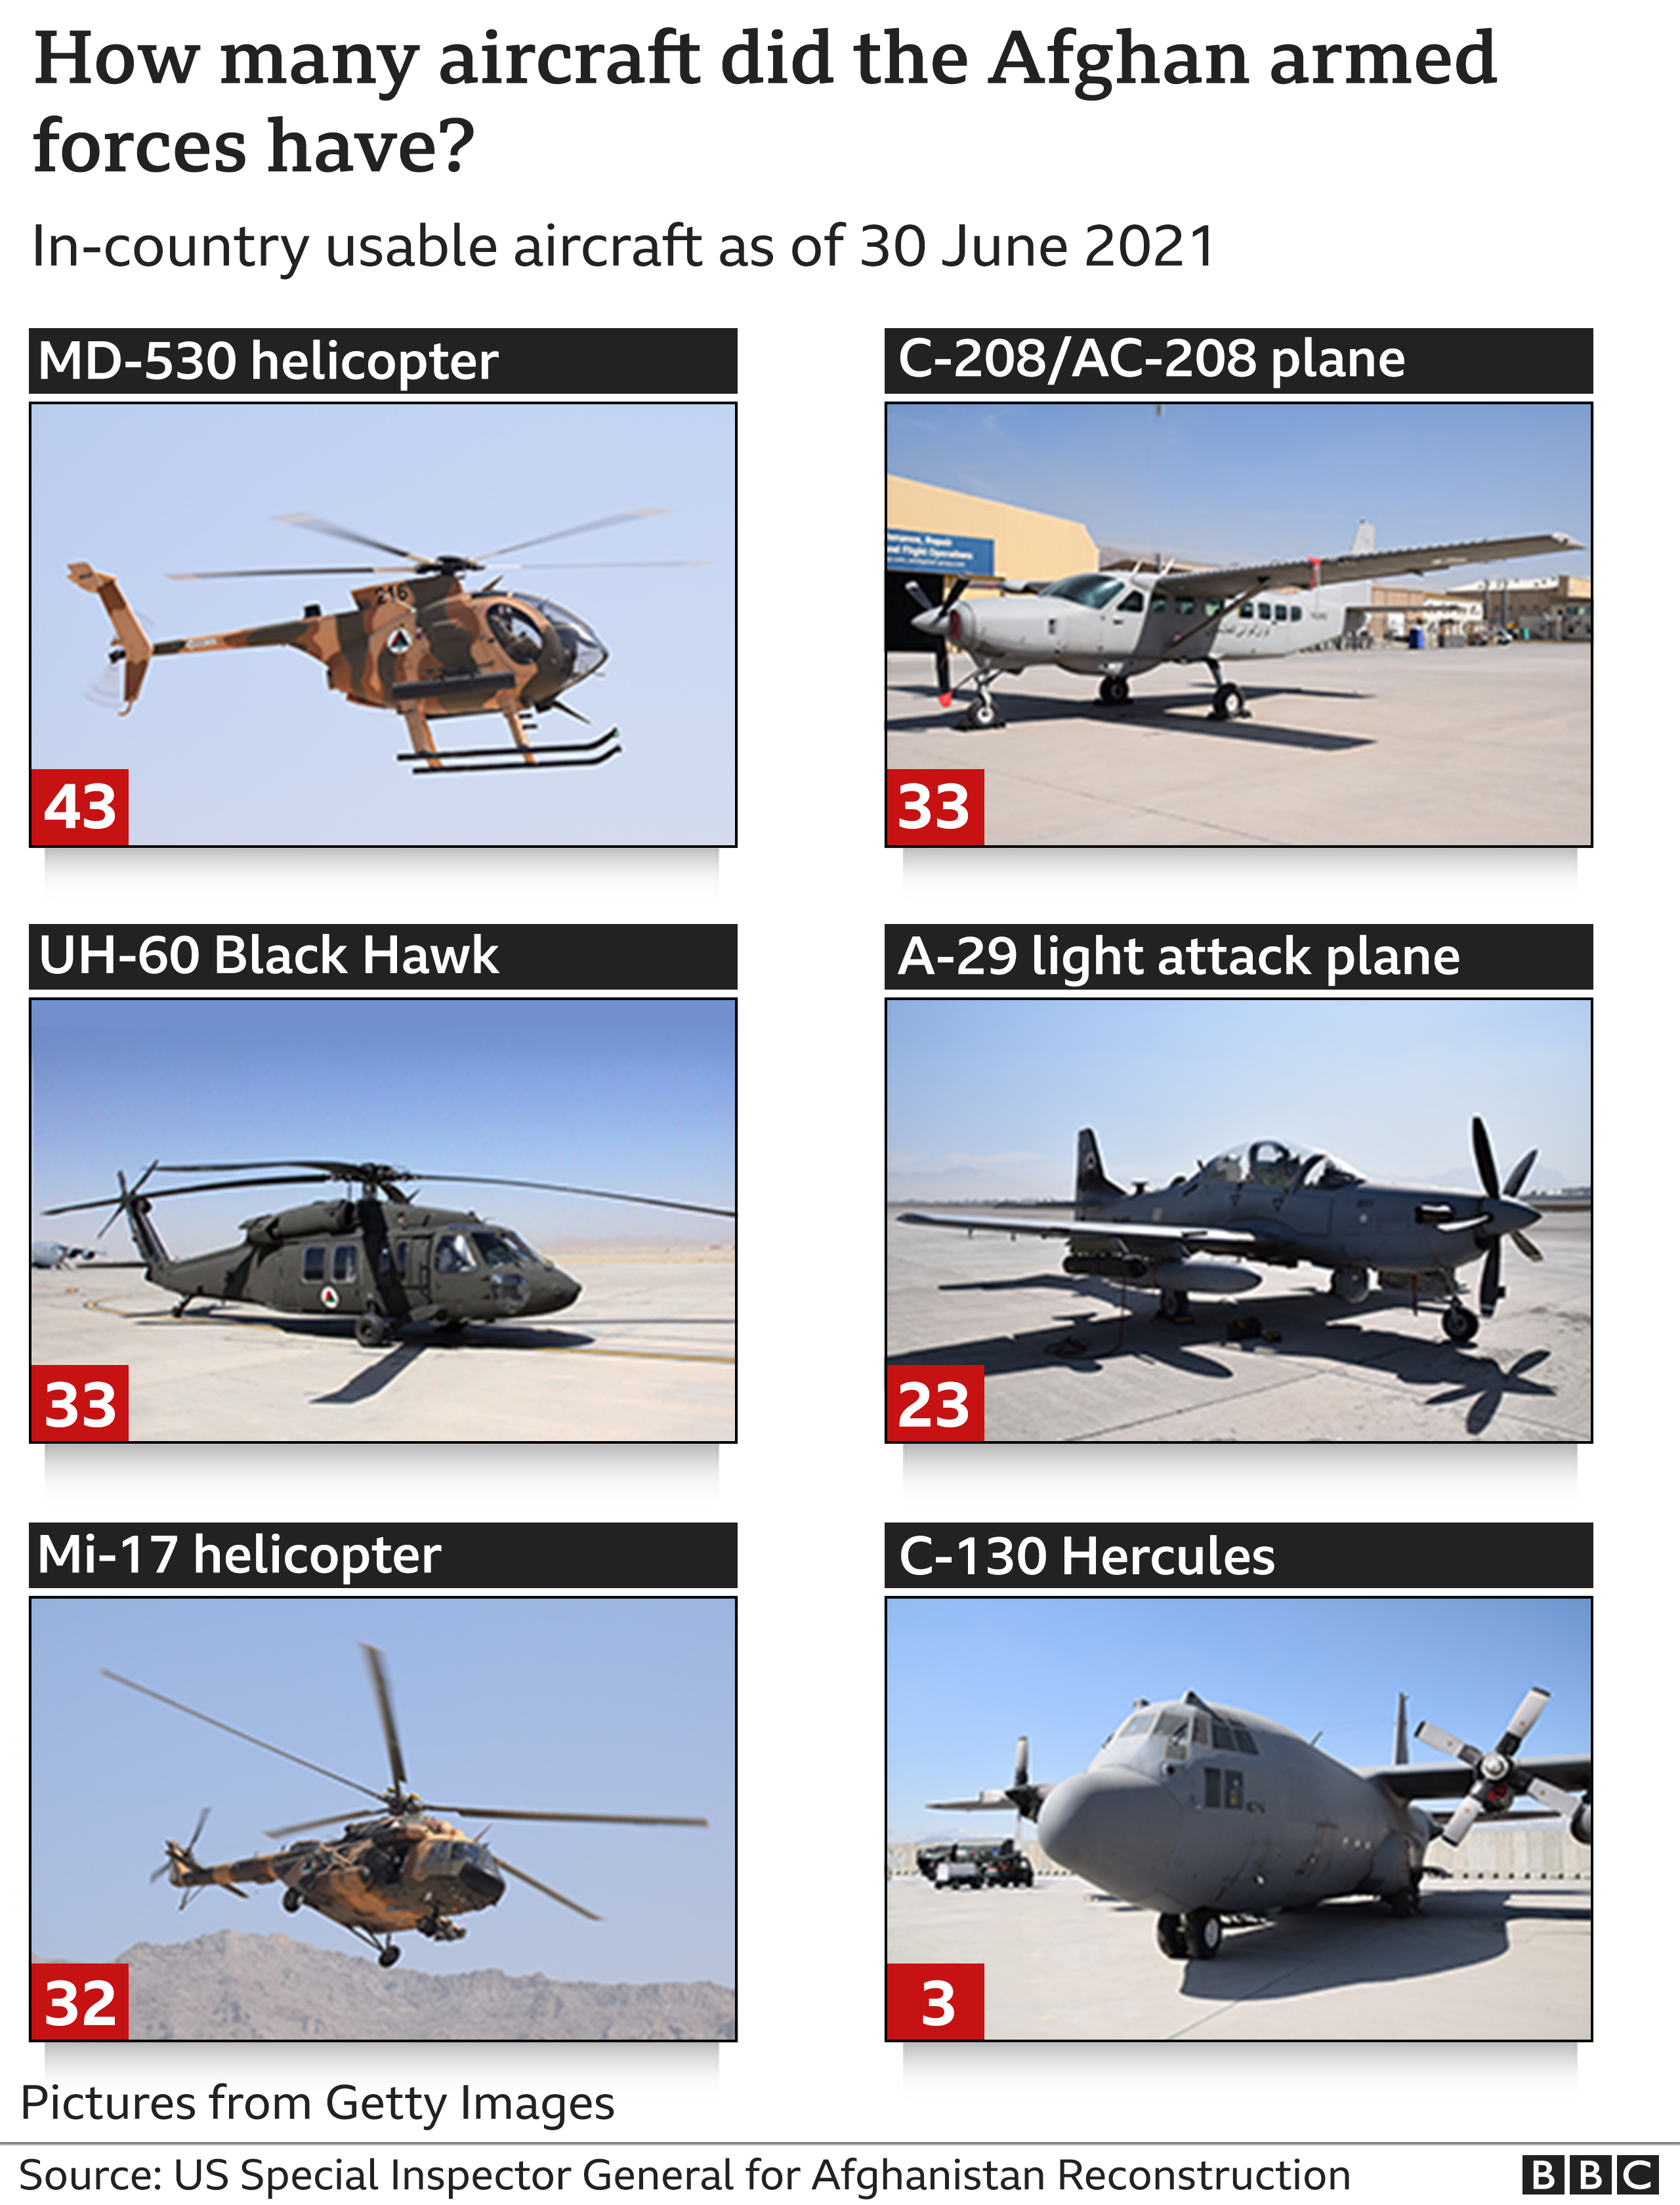 Graphic showing types and numbers of aircraft operated by the Afghan armed forces